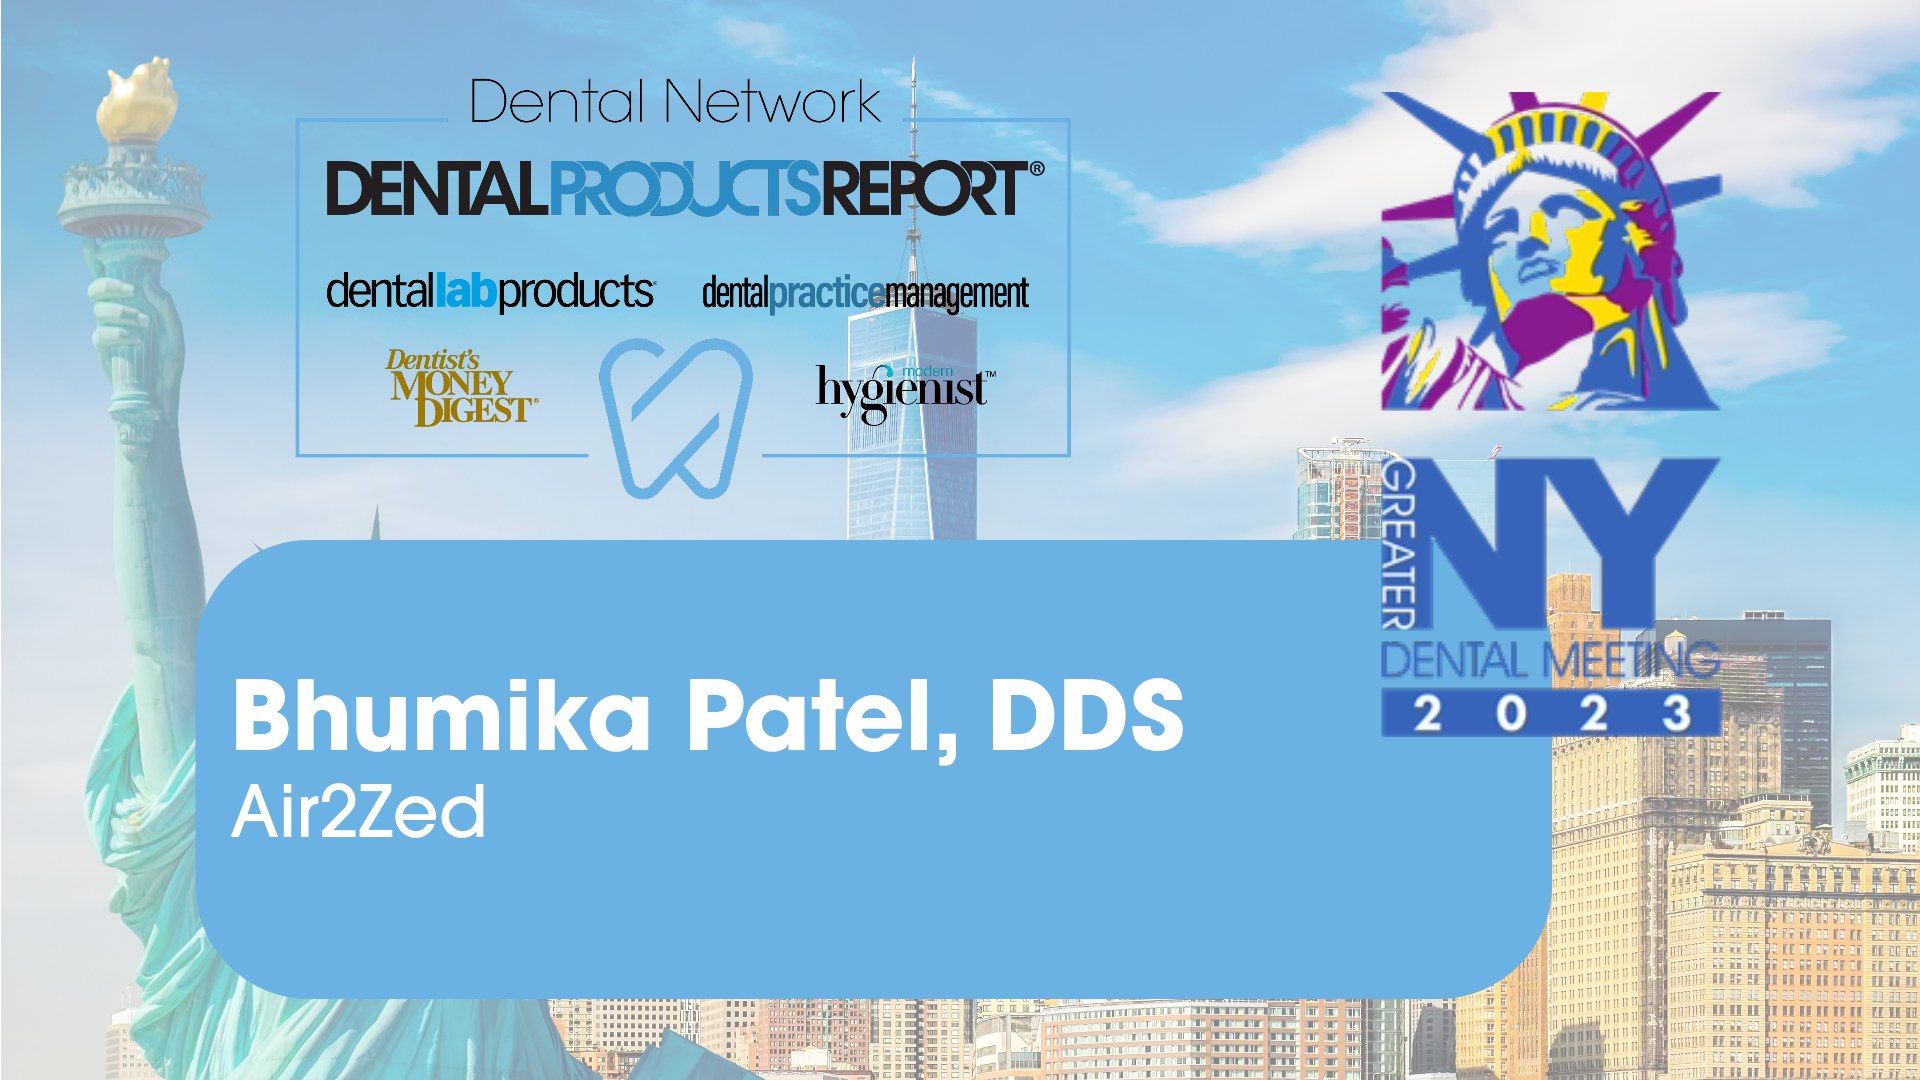 At the Greater New York Dental Meeting 2023, Dental Products Report had a chat with Bhumika Patel, DDS to discuss Air2Zed technology. [2 minutes]